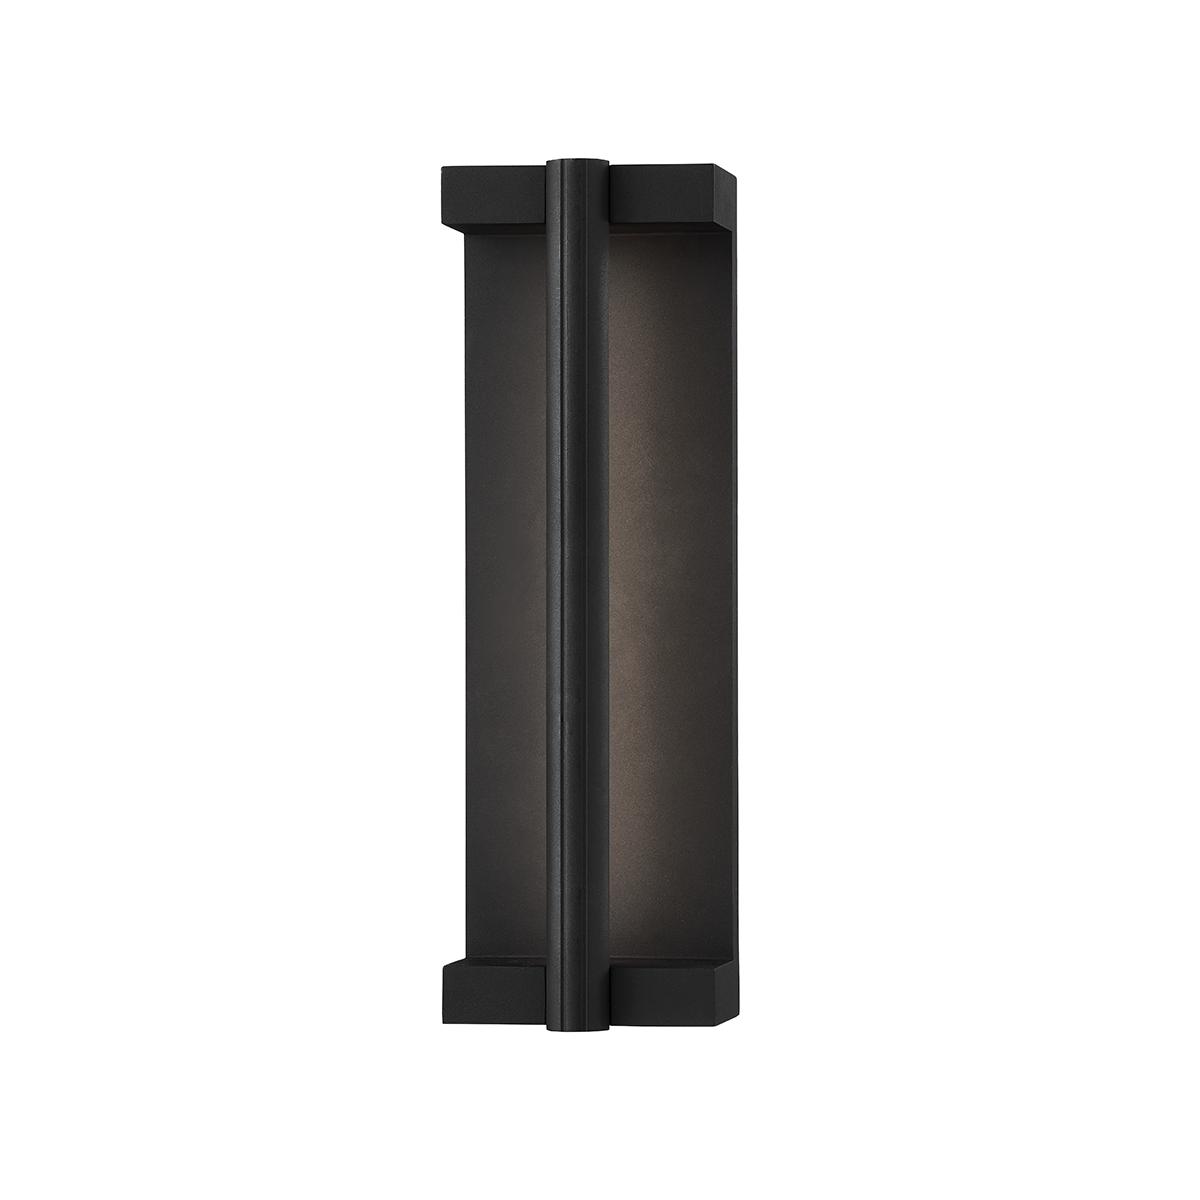 Troy CALLA 1 LIGHT SMALL EXTERIOR WALL SCONCE B1251 Outdoor l Wall Troy Lighting   